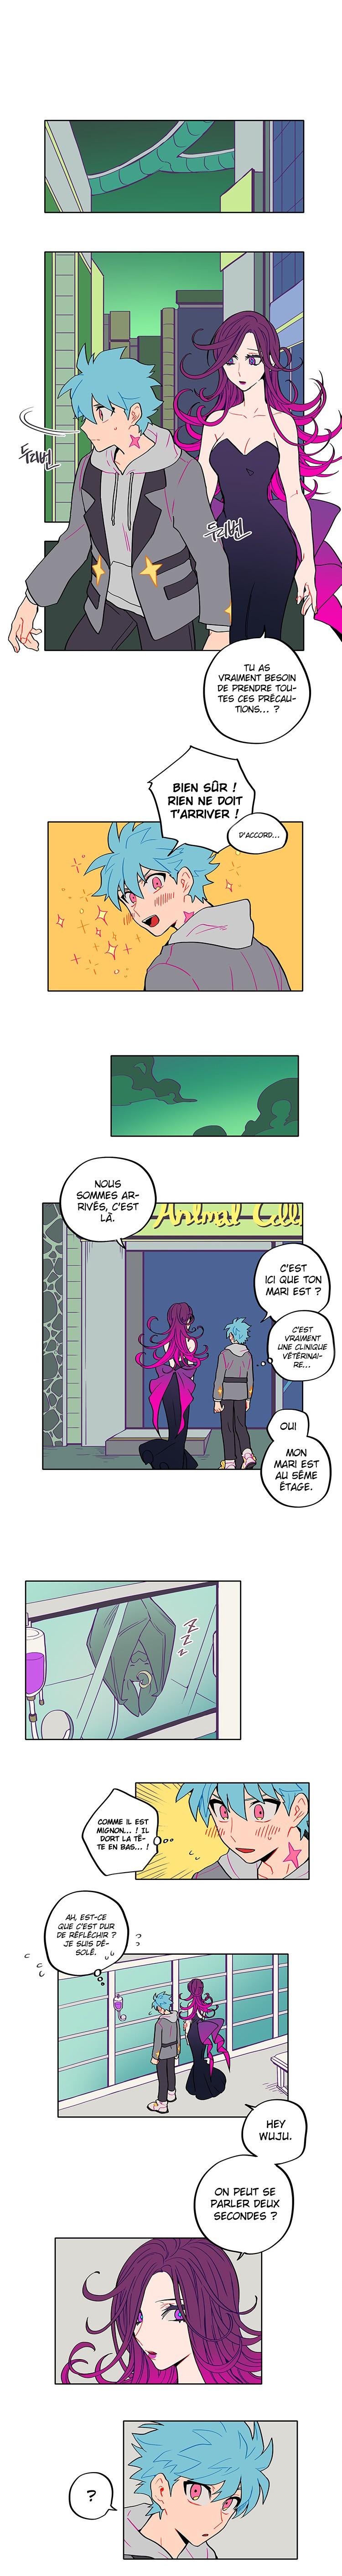 Universe's Sword: Chapter 8 - Page 1